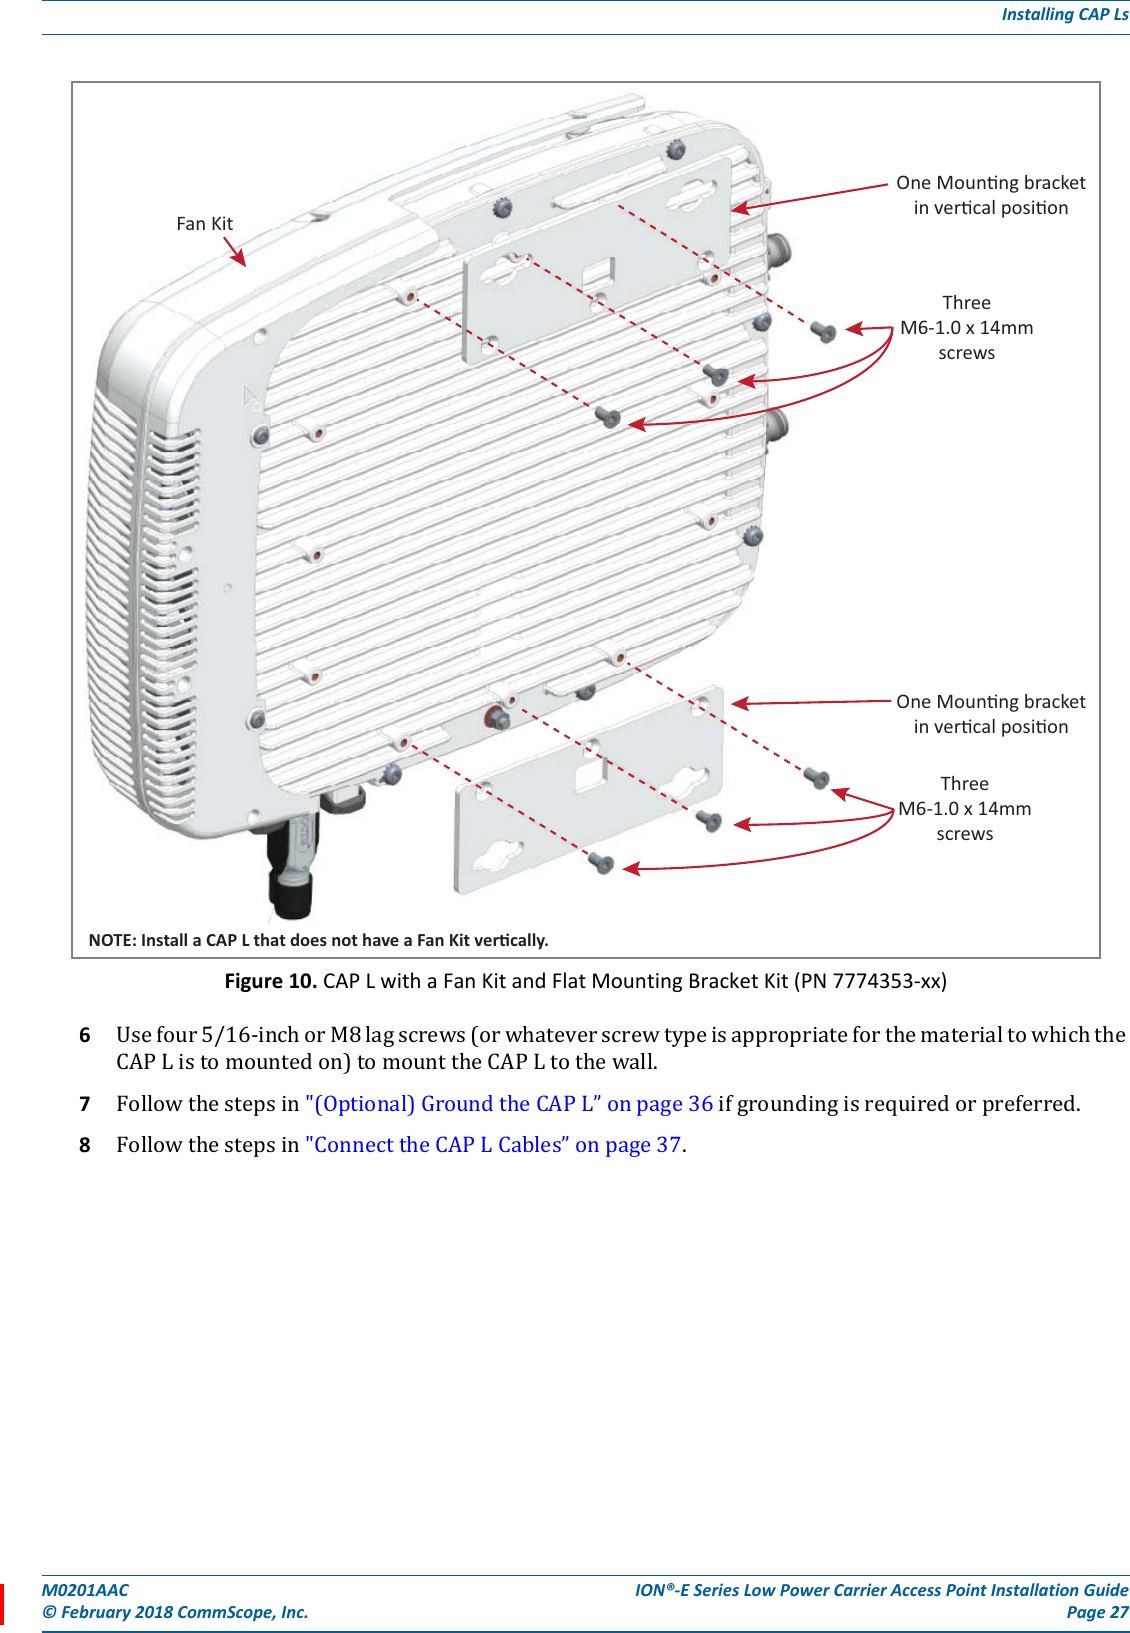 M0201AAC ION®-E Series Low Power Carrier Access Point Installation Guide© February 2018 CommScope, Inc. Page 27Installing CAP LsFigure 10. CAP L with a Fan Kit and Flat Mounting Bracket Kit (PN 7774353-xx)6Usefour5/16-inchorM8lagscrews(orwhateverscrewtypeisappropriateforthematerialtowhichtheCAPListomountedon)tomounttheCAPLtothewall.7Followthestepsin&quot;(Optional)GroundtheCAPL”onpage36ifgroundingisrequiredorpreferred.8Followthestepsin&quot;ConnecttheCAPLCables”onpage37.One Mounng bracketin vercal posionThreeM6-1.0 x 14mmscrewsOne Mounng bracketin vercal posionThreeM6-1.0 x 14mmscrewsNOTE: Install a CAP L that does not have a Fan Kit vercally.Fan Kit